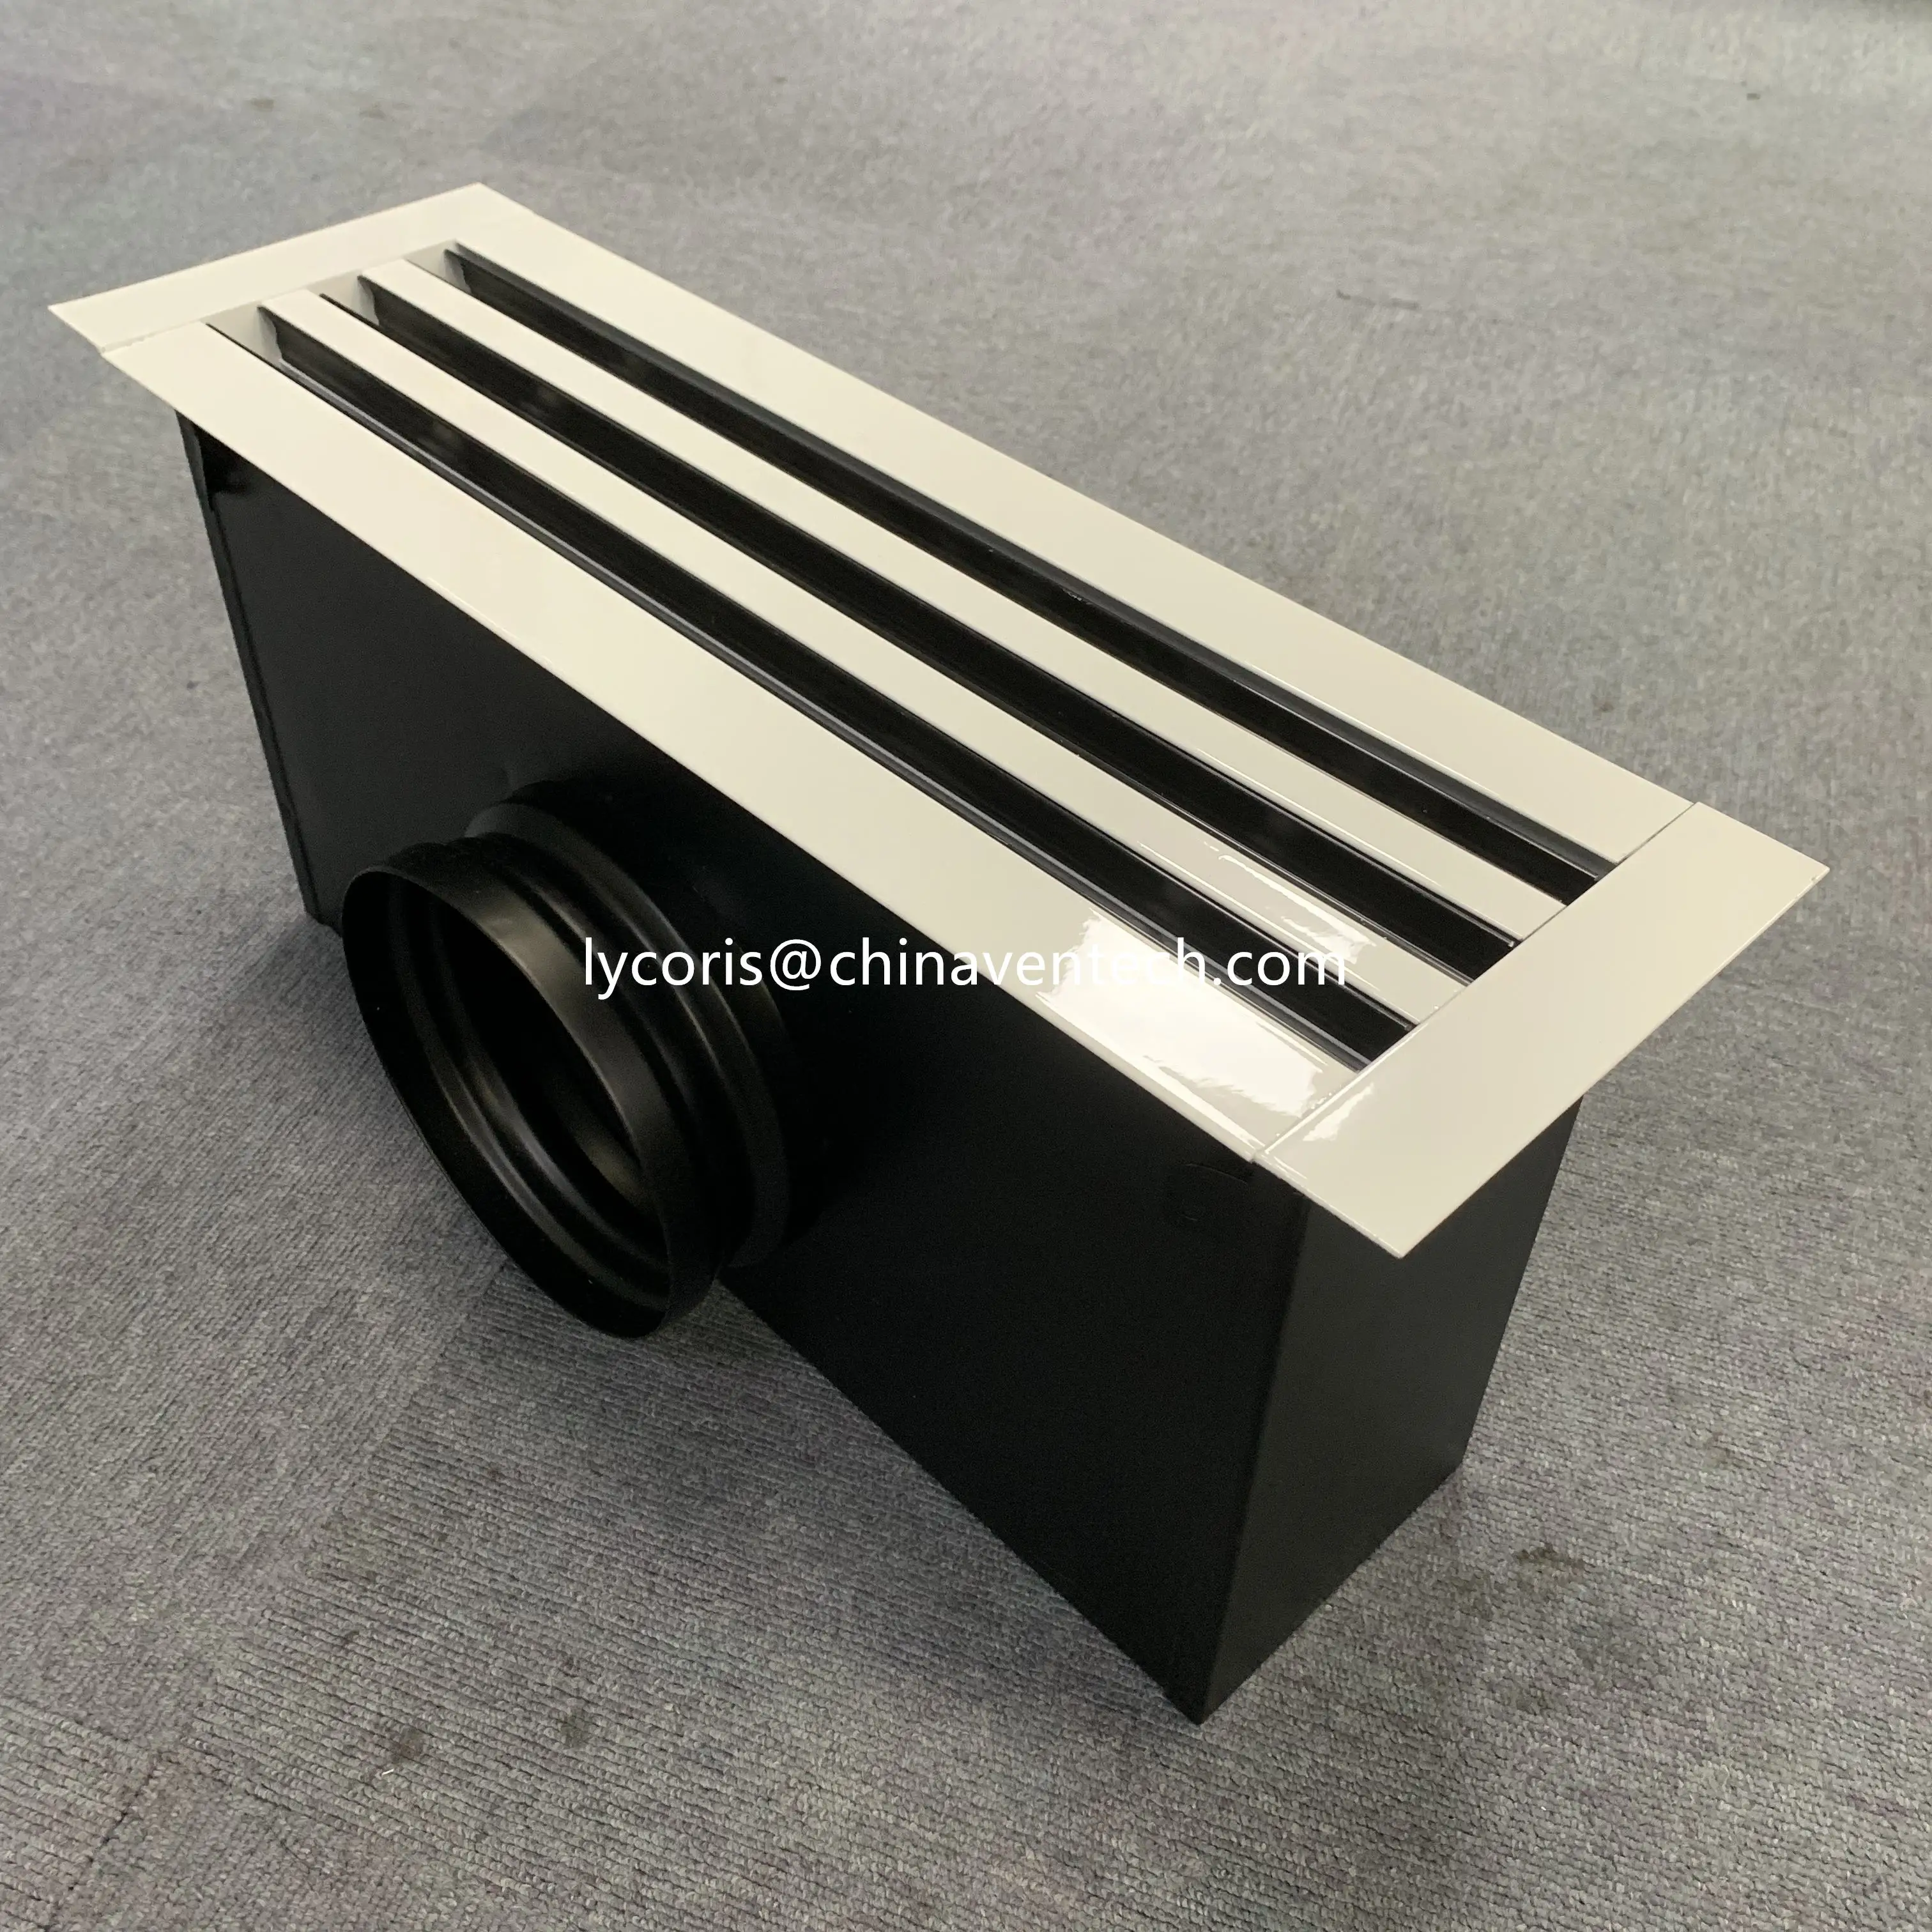 high quality air aluminum linear slot linear bar grille diffuser plenum box slot diffuser adaptor with adjustable blades